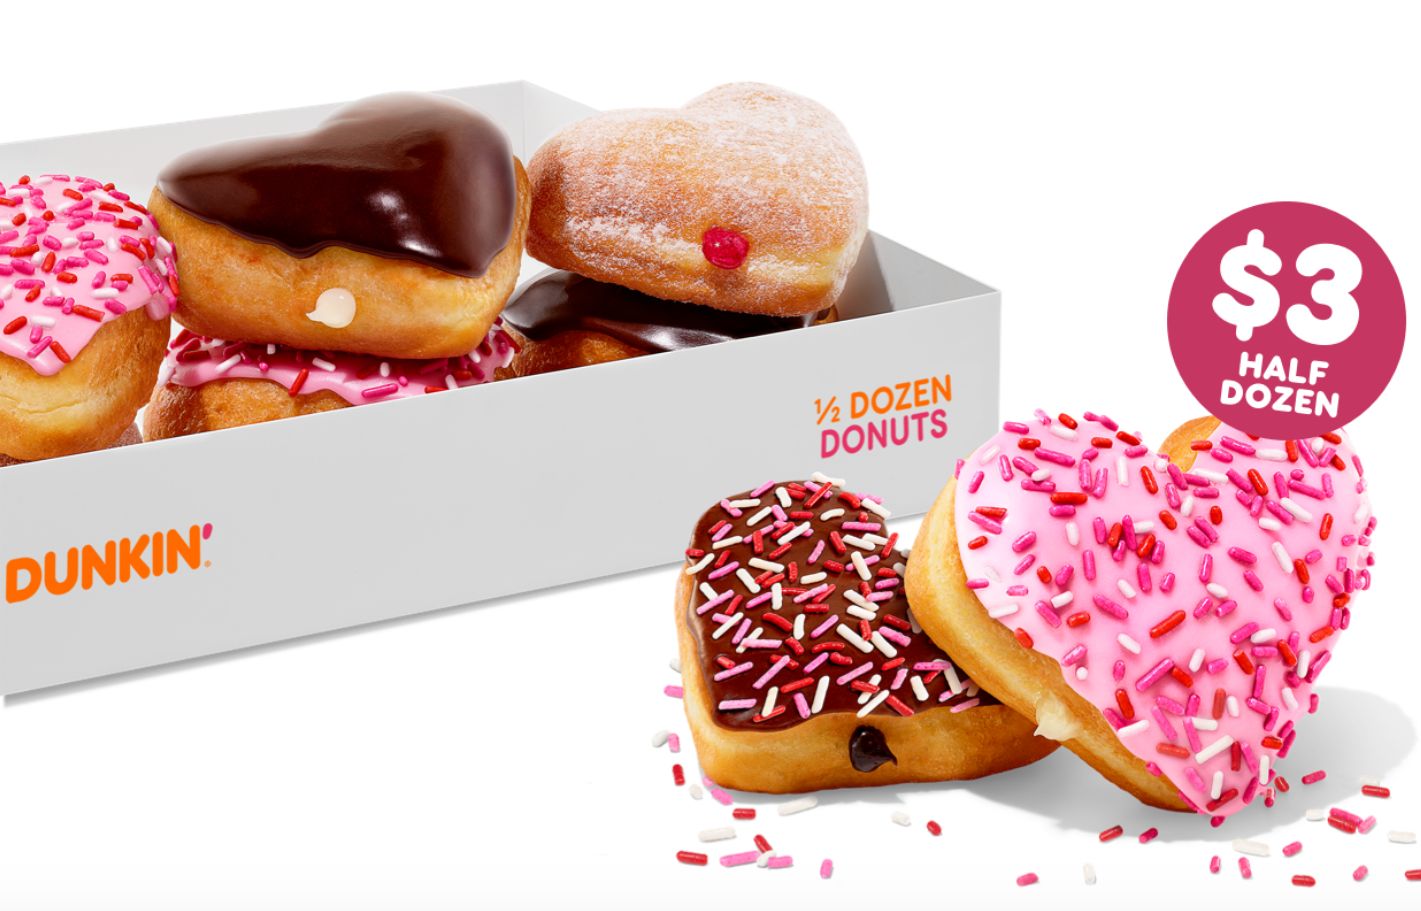 Claim a $3 Half Dozen Donuts Using Your Dunkin’ Mobile App Through to February 12: A Dunkin’ Rewards Exclusive